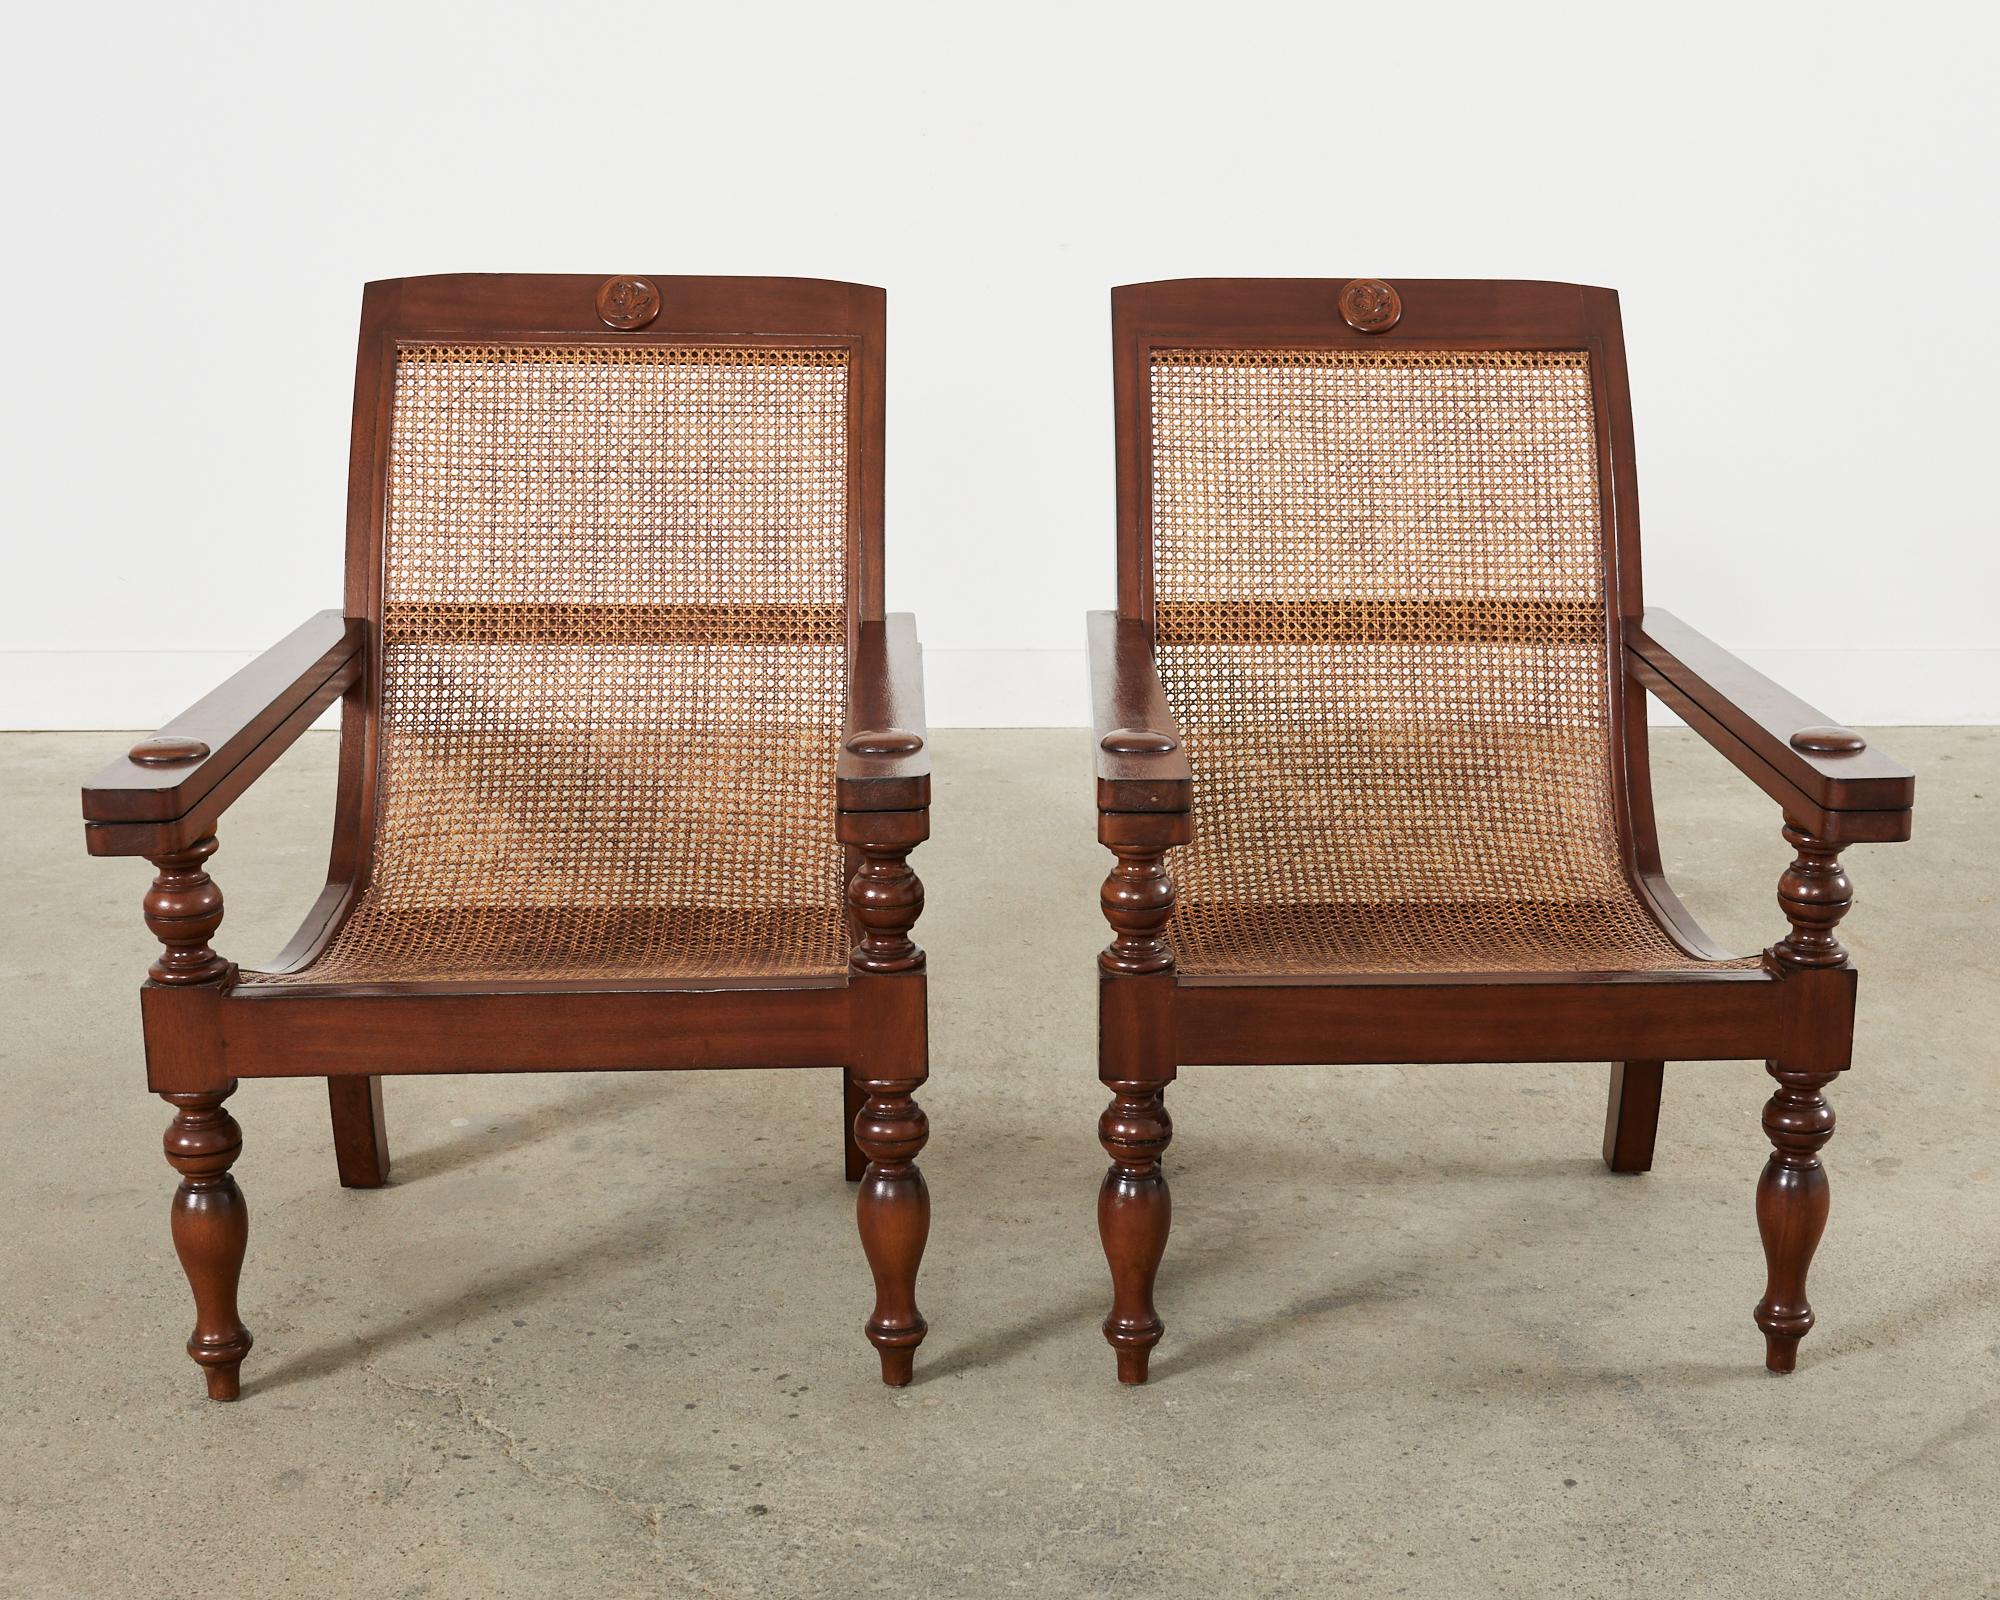 Hand-Crafted Pair of Dutch Colonial Style Mahogany Cane Plantation Chairs